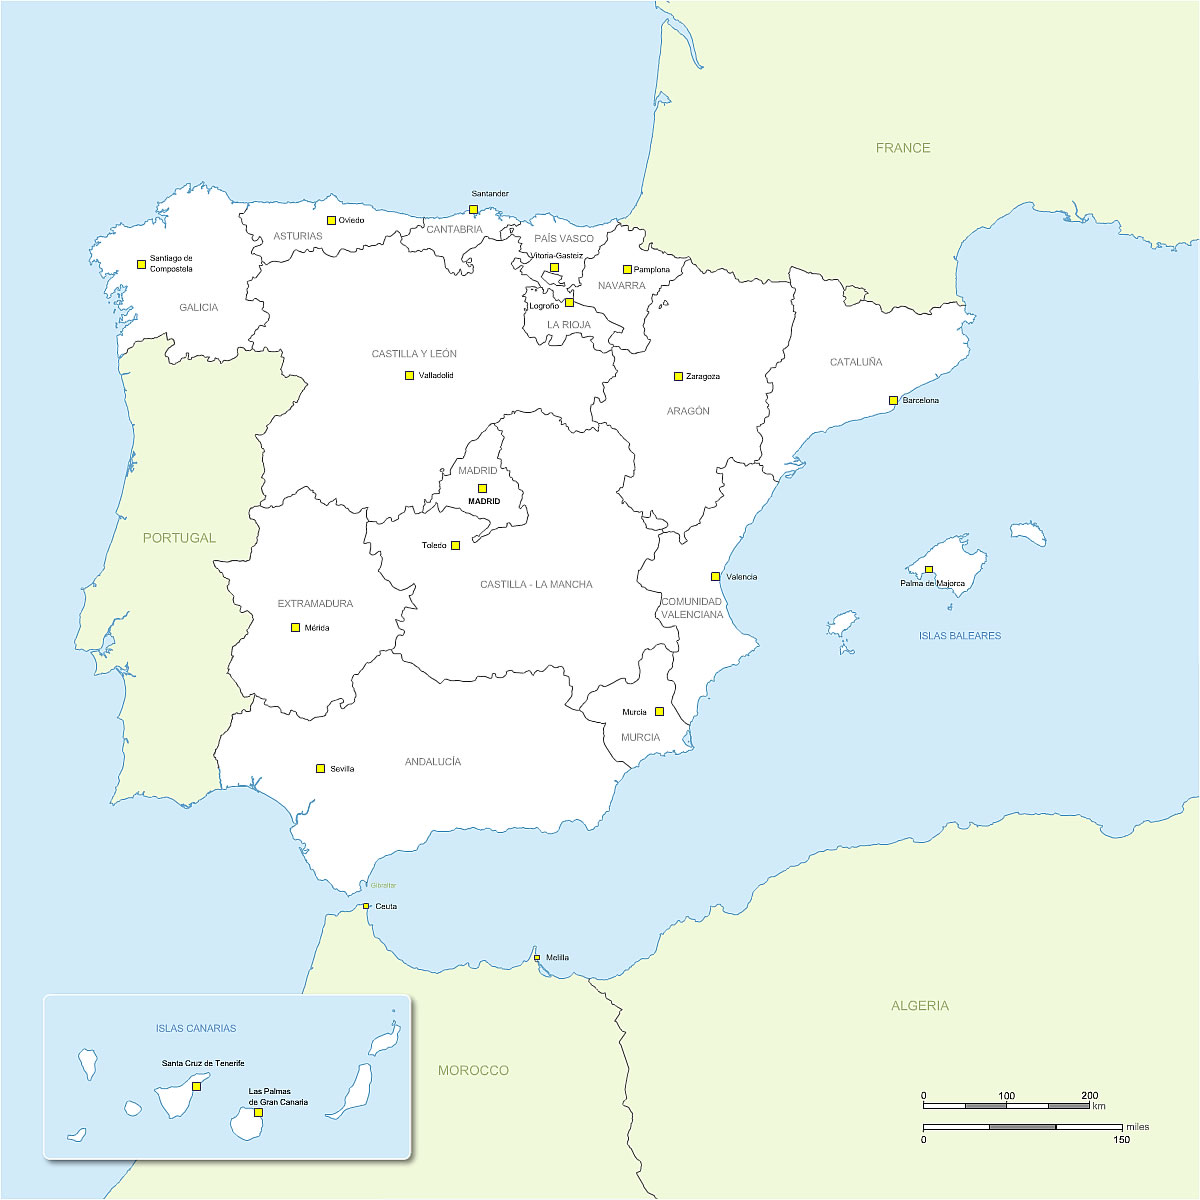 Hi-resolution vector map of Spain regions with names